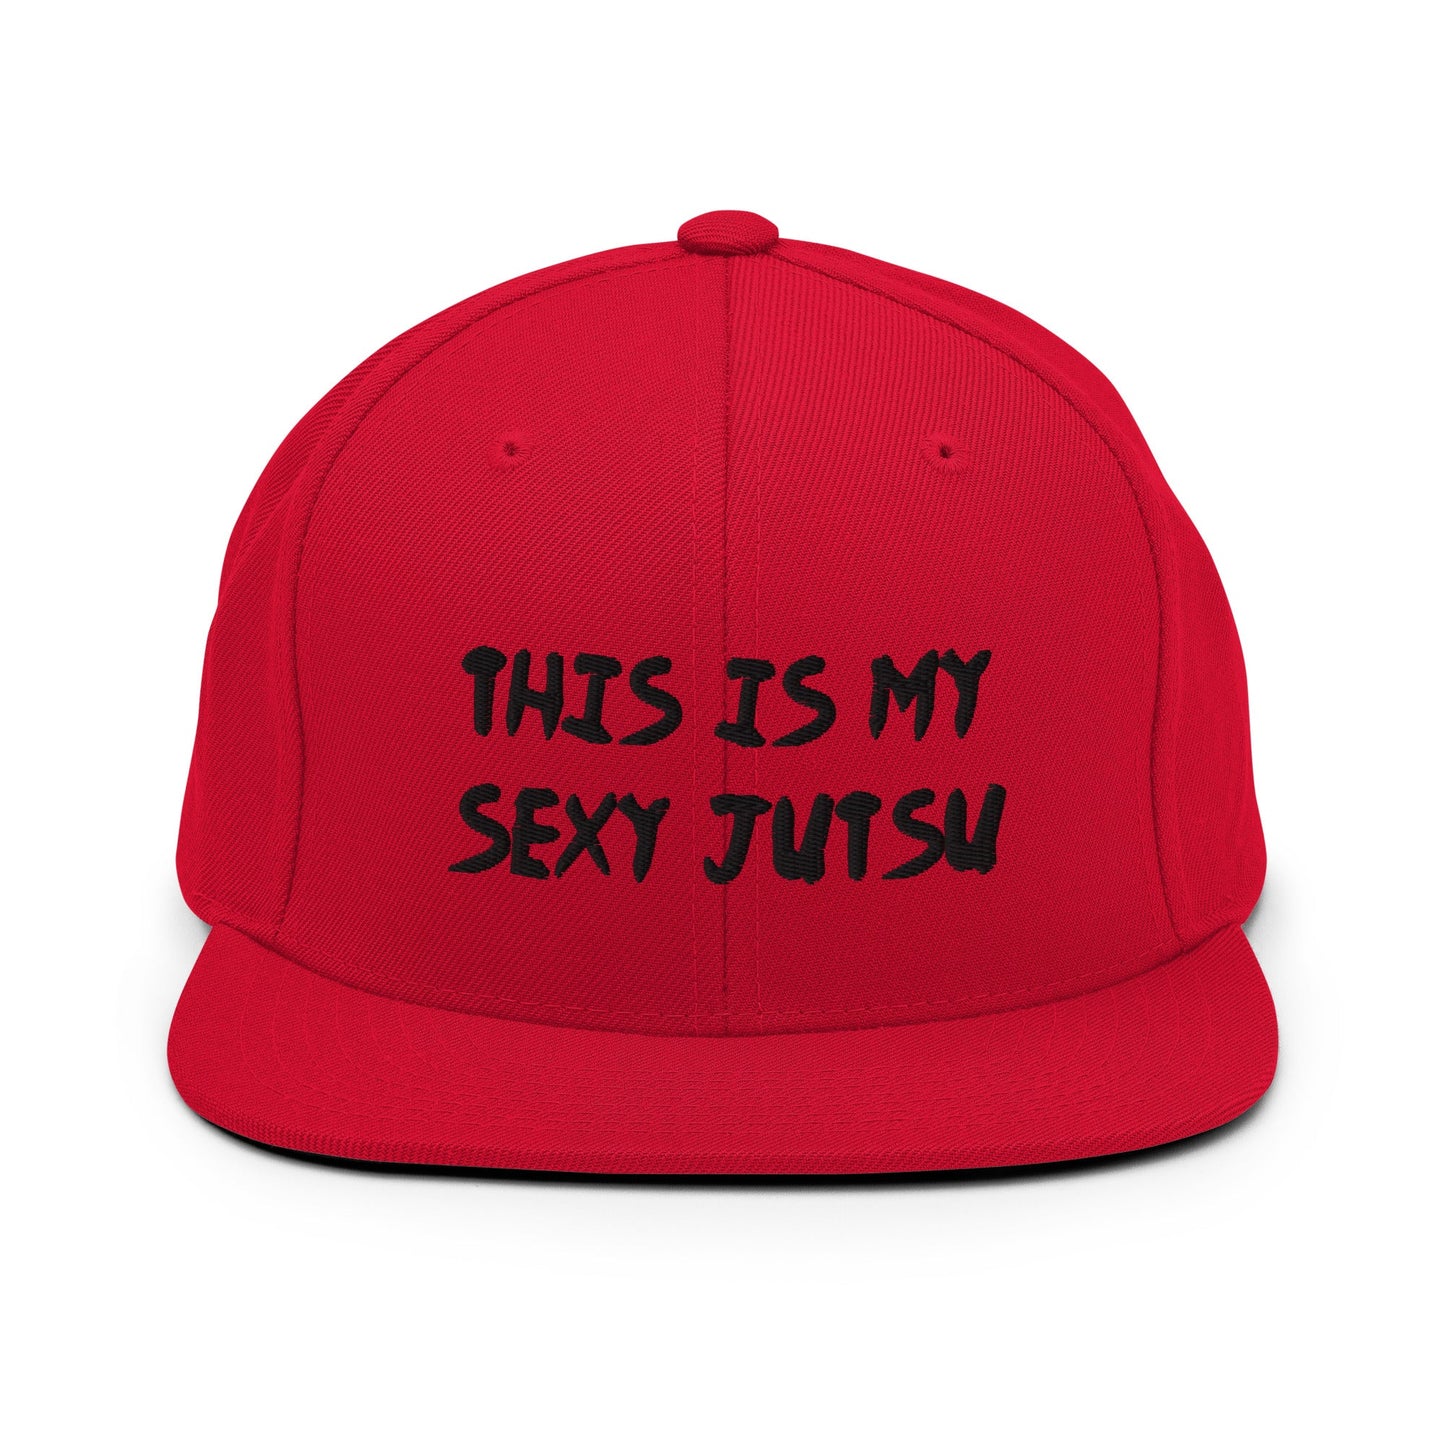 'This Is My Sexy Jutsu' Embrioidered Unisex Anime Snap Back Hat